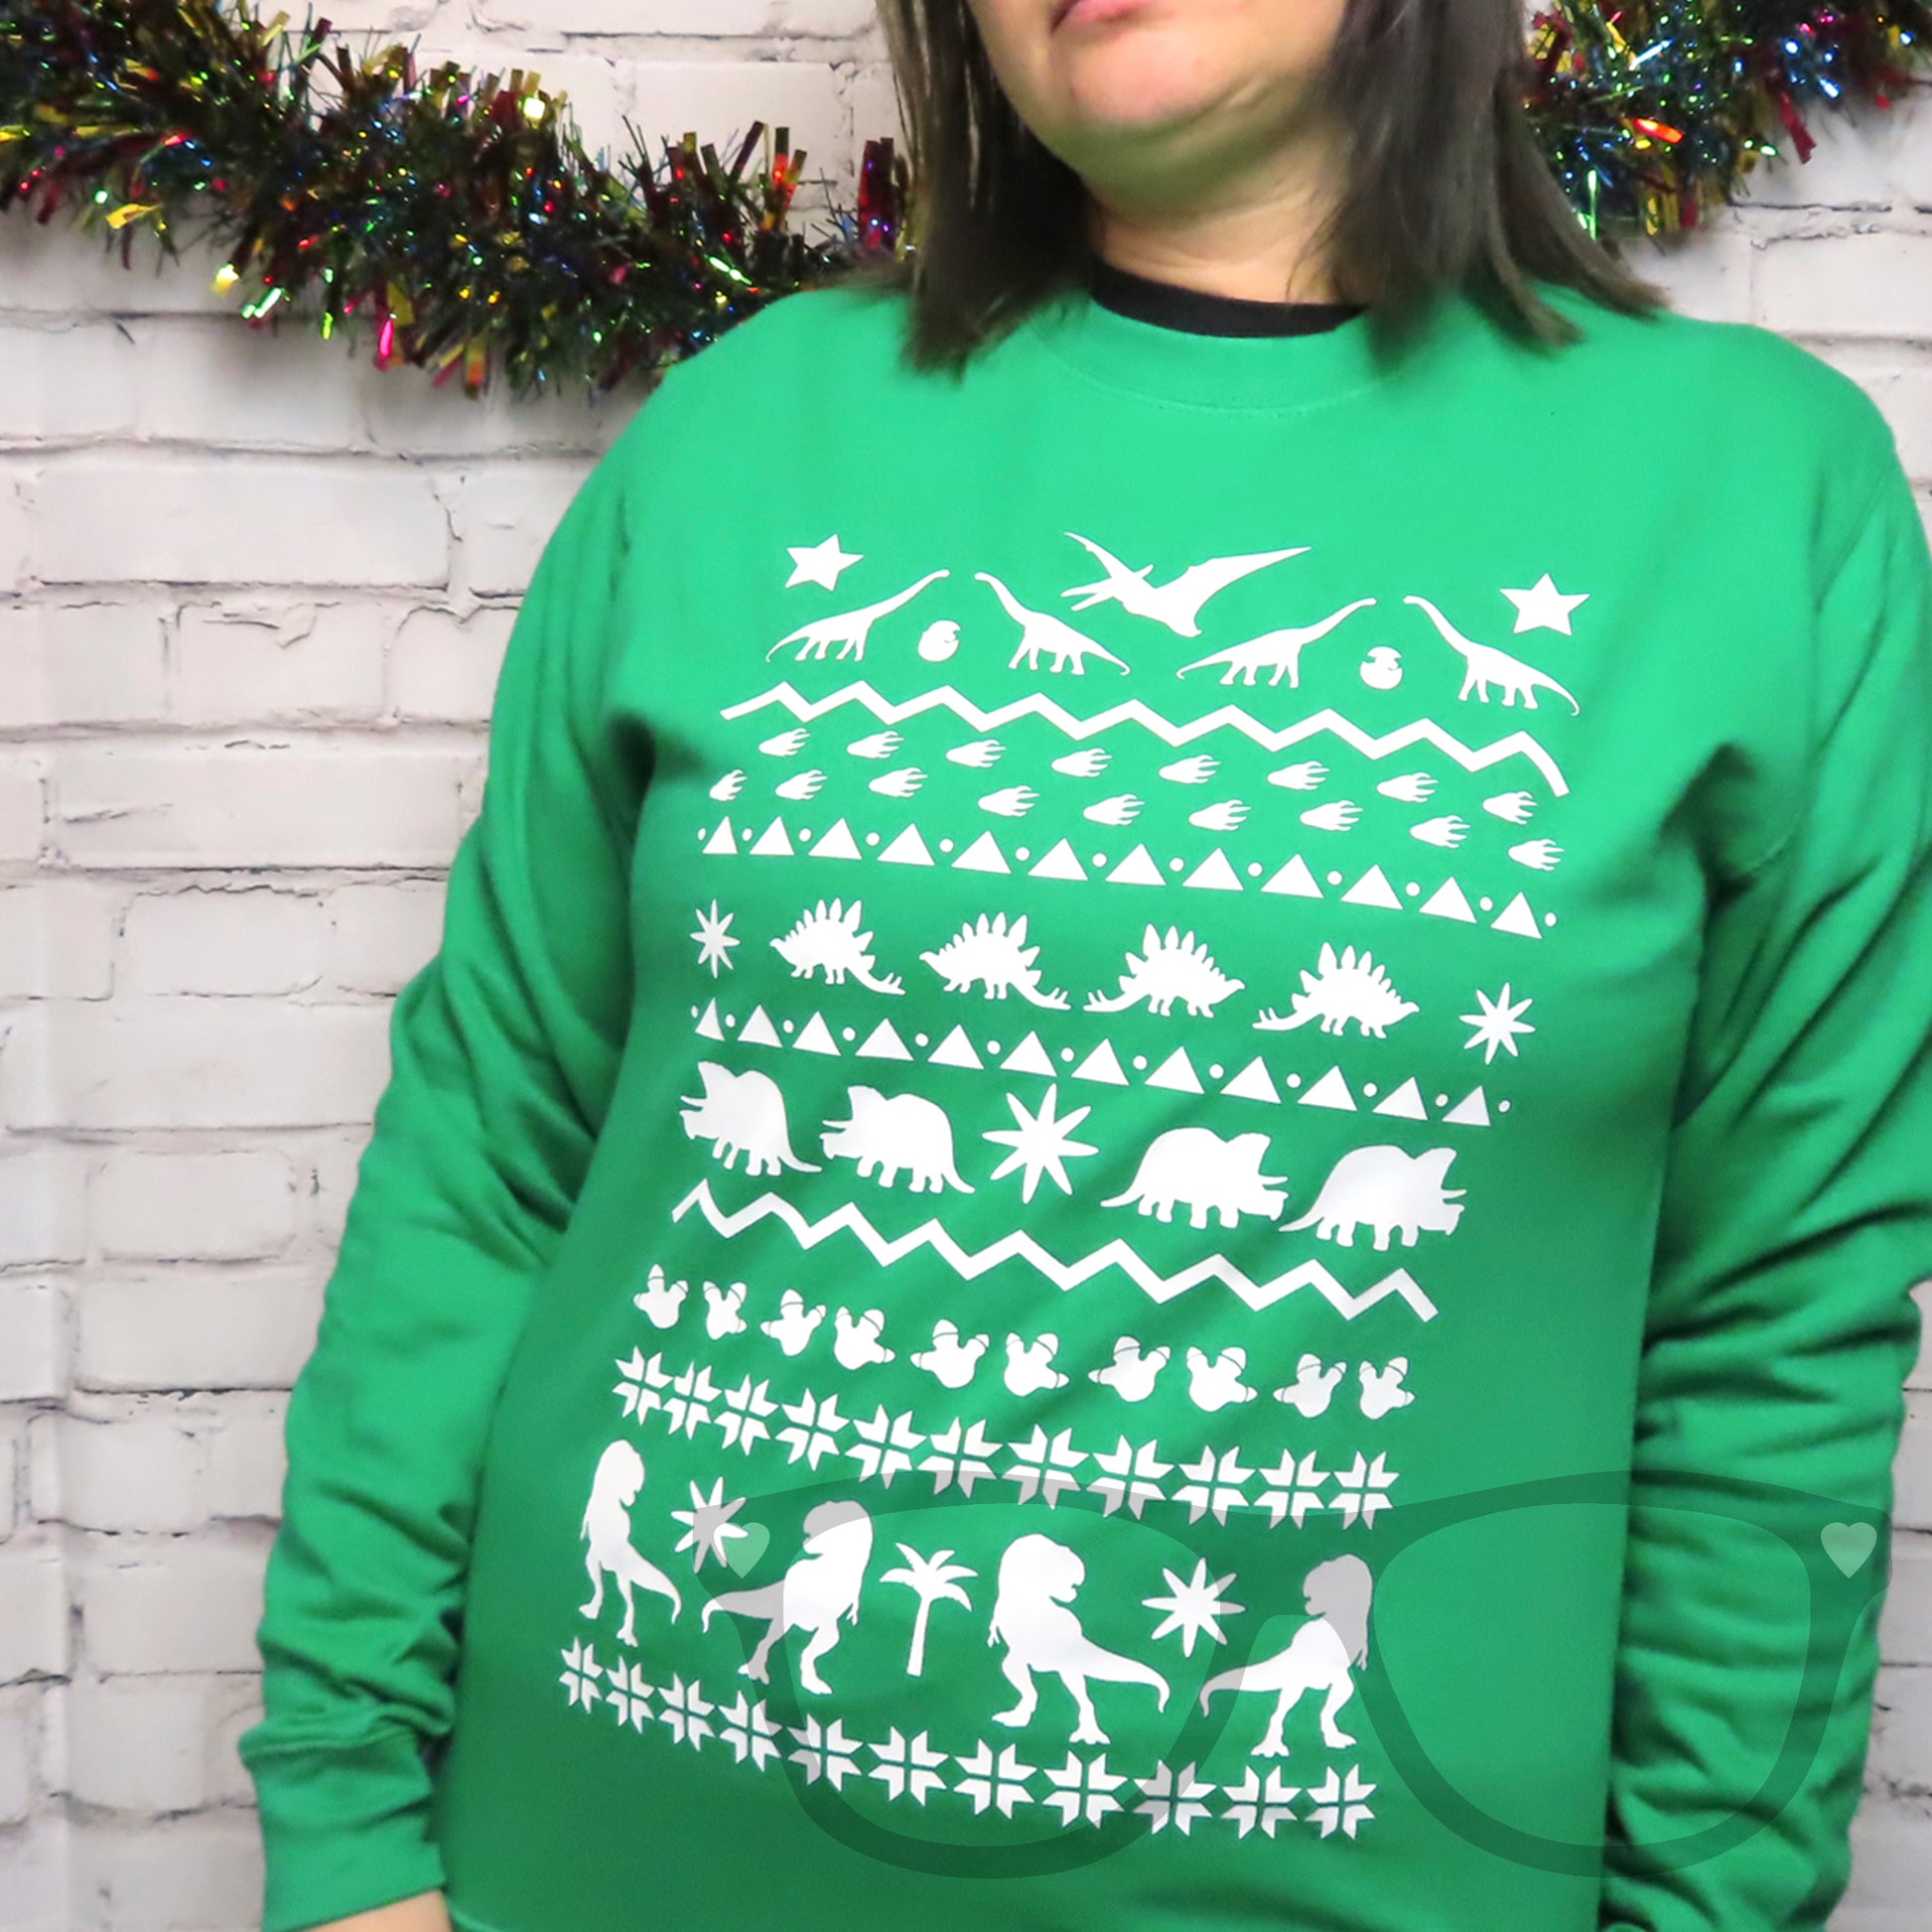 Green sweater with white dinosaur design ideal for the christmas and festive period